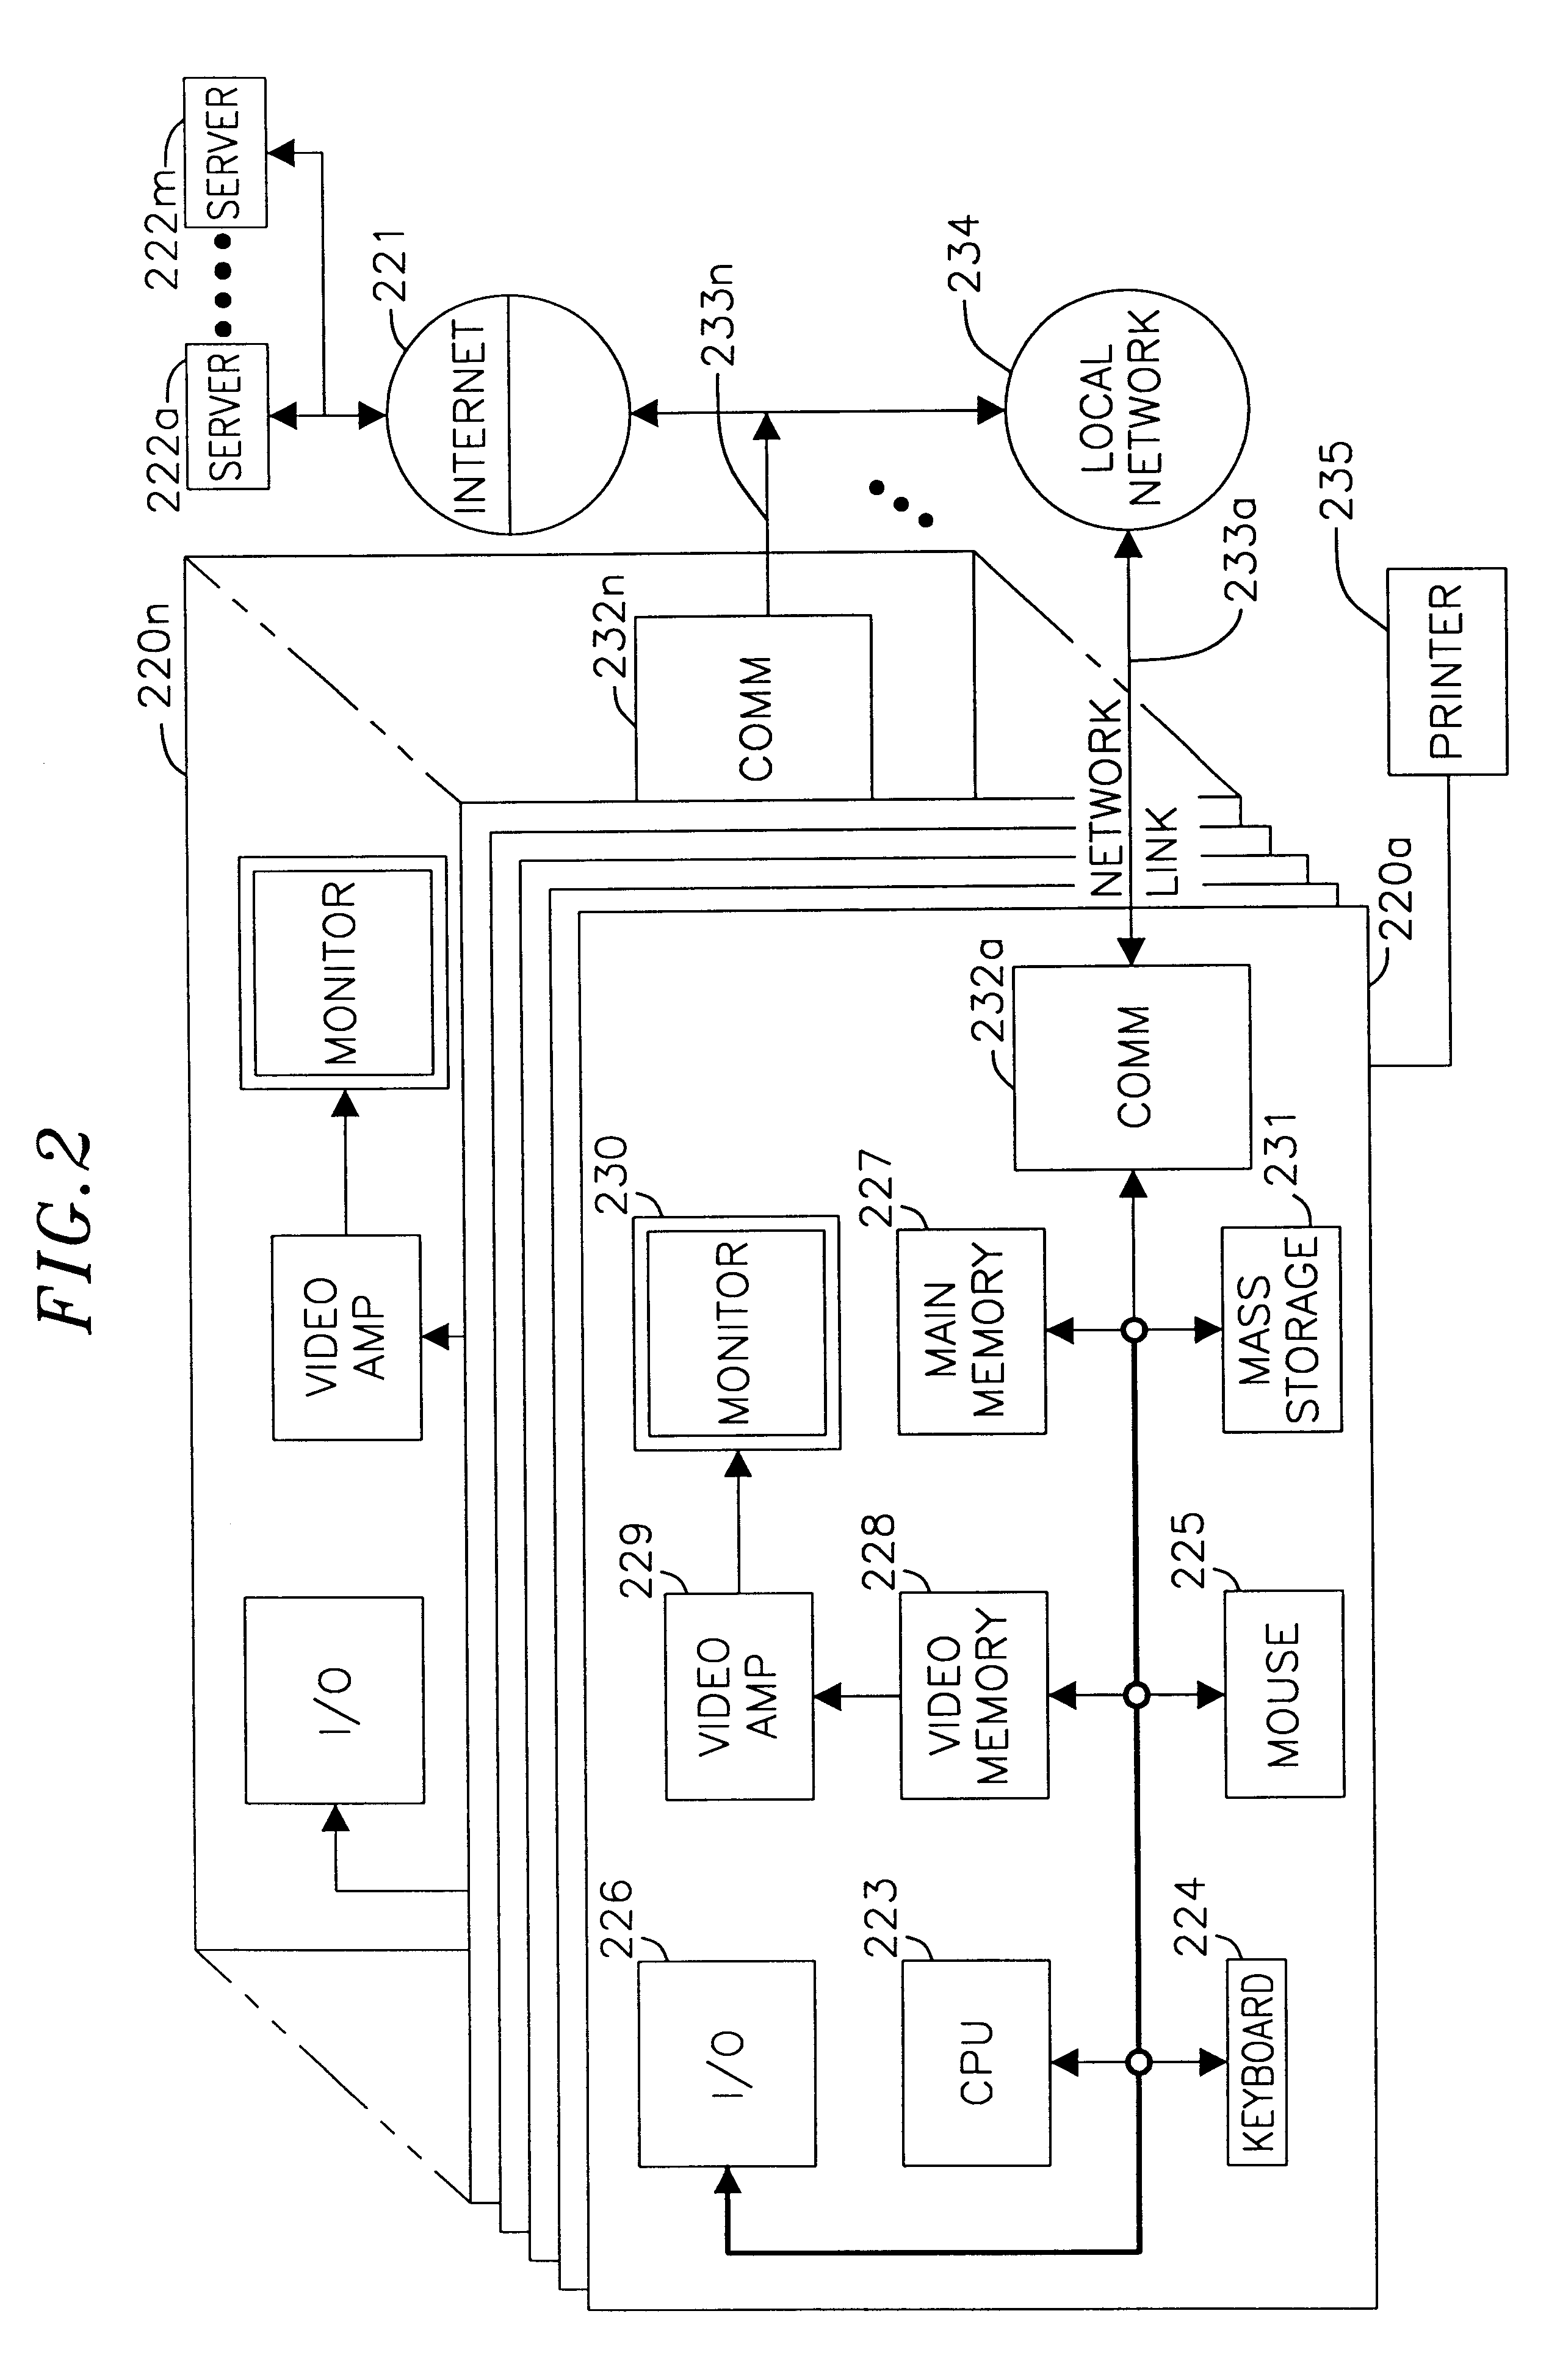 Auditing method and system for an on-line value-bearing item printing system